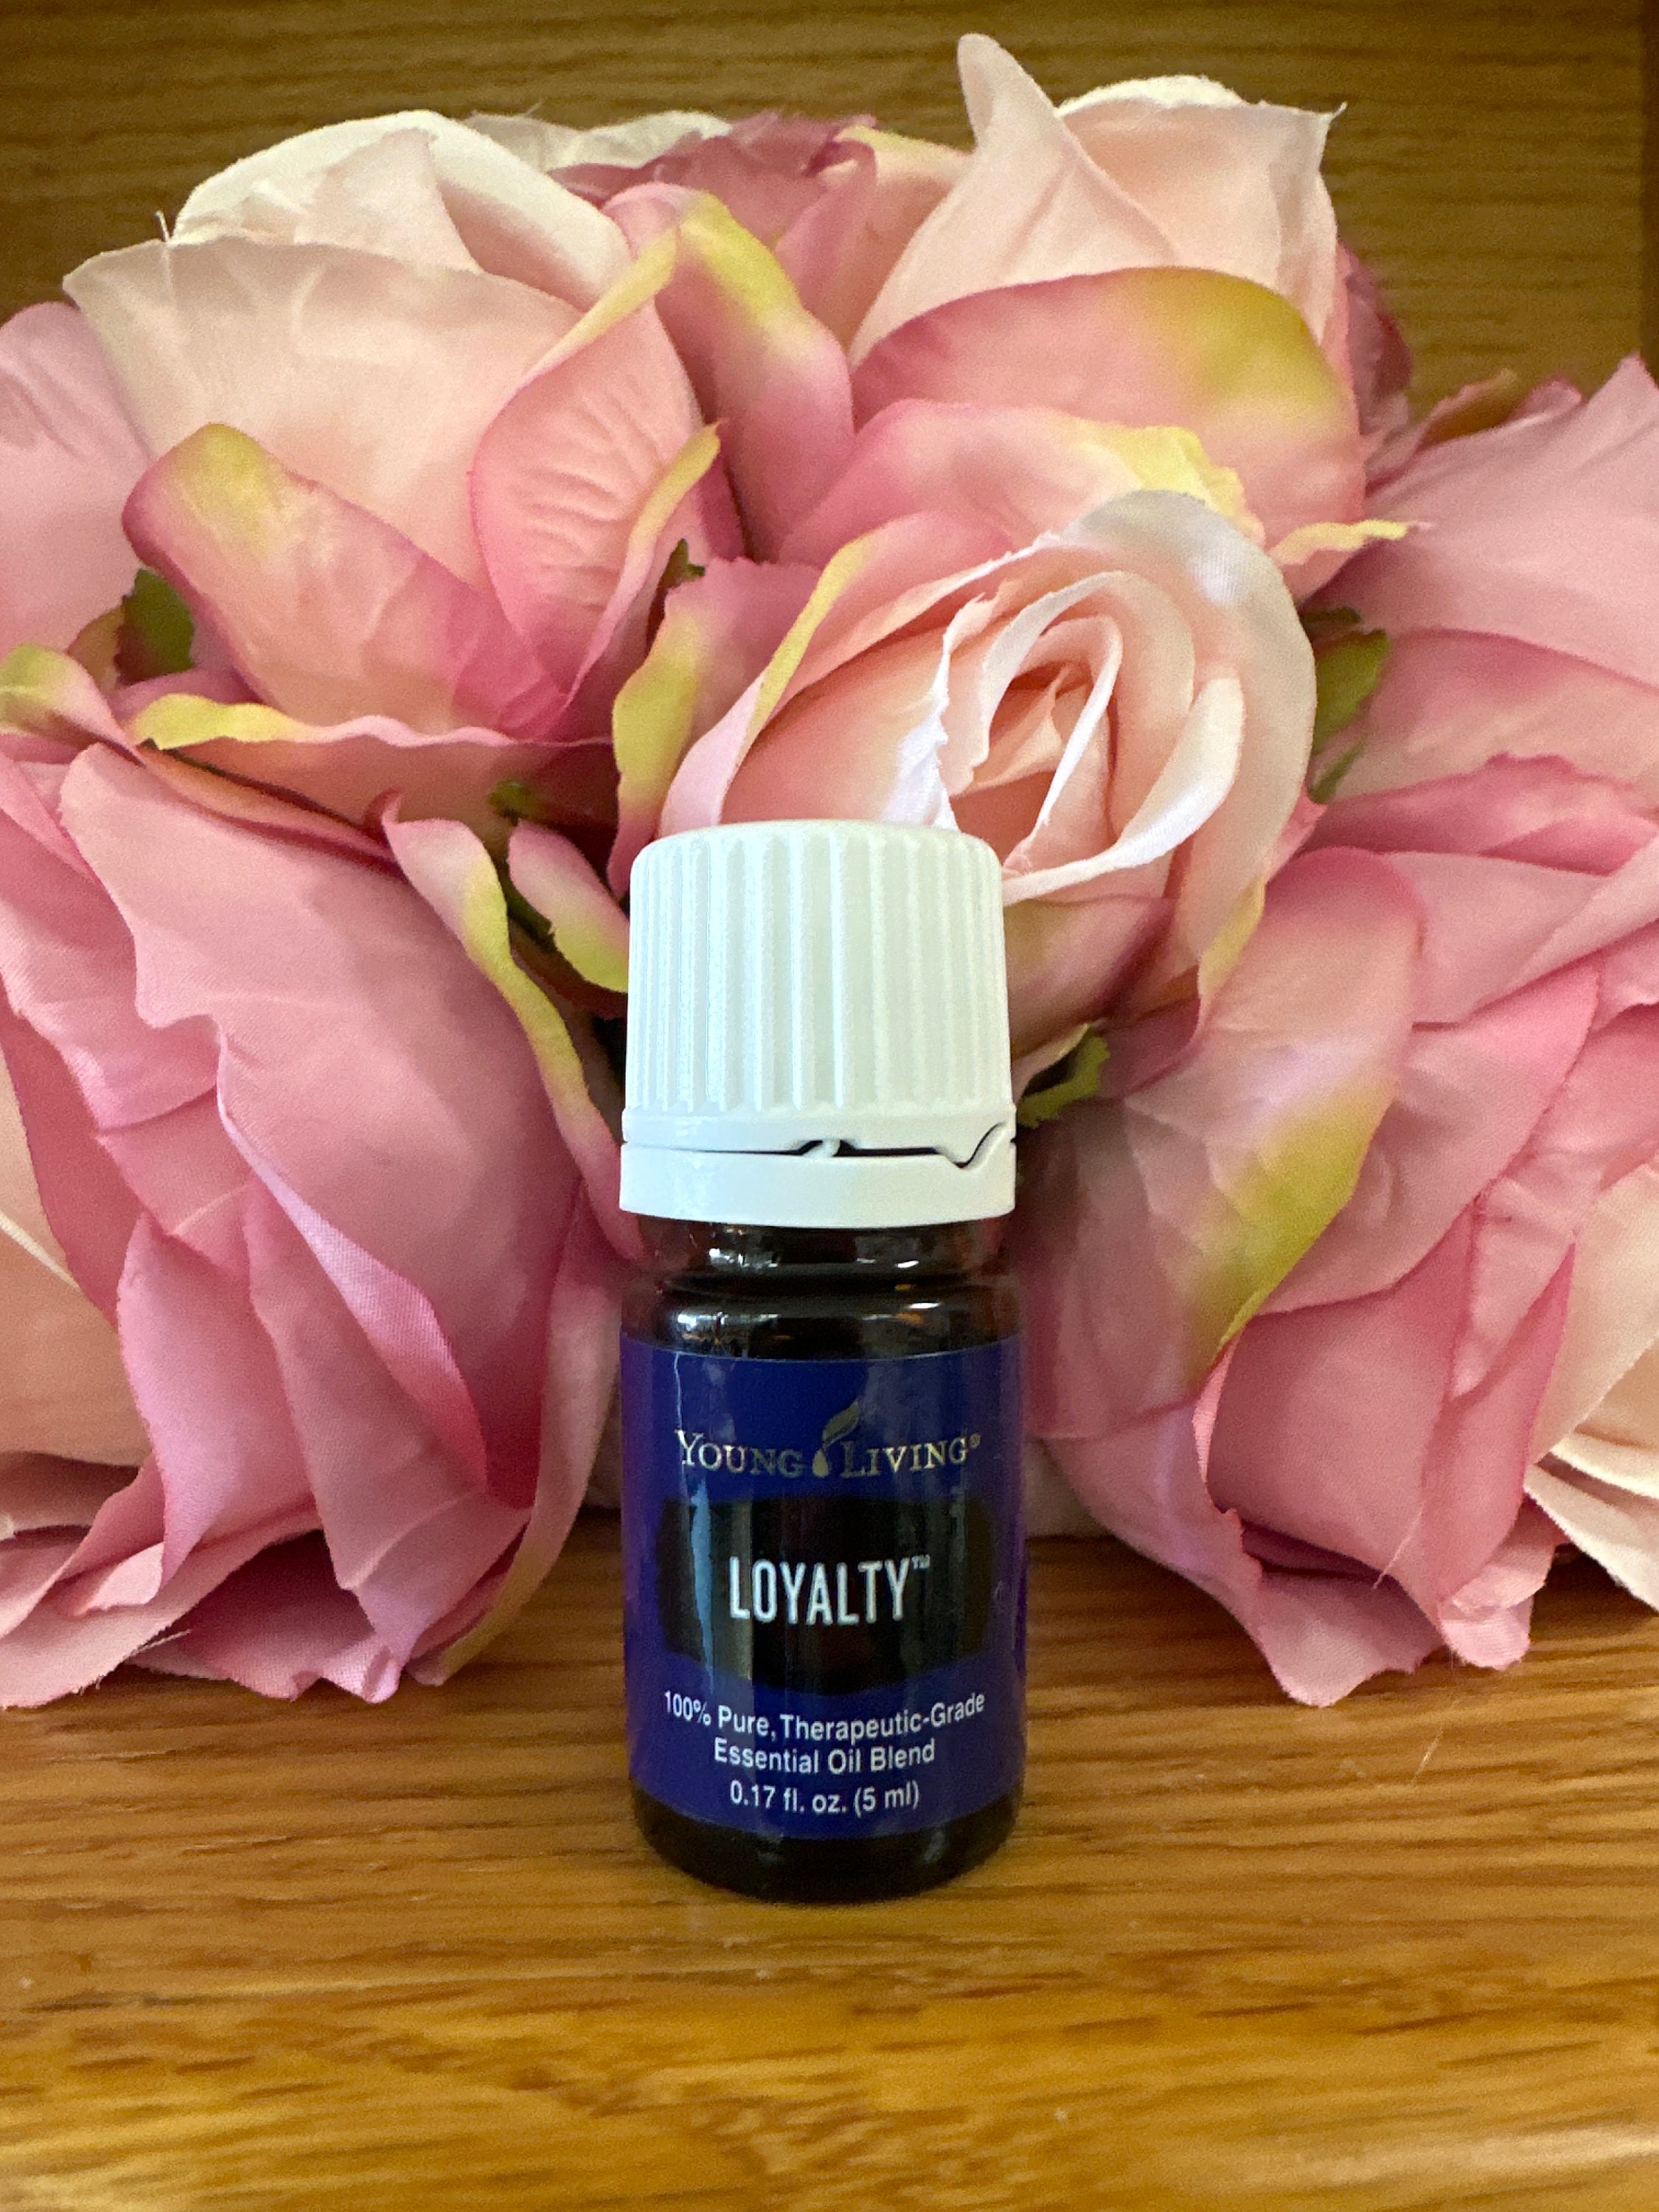 Young Living Rose Essential Oil - 5ml